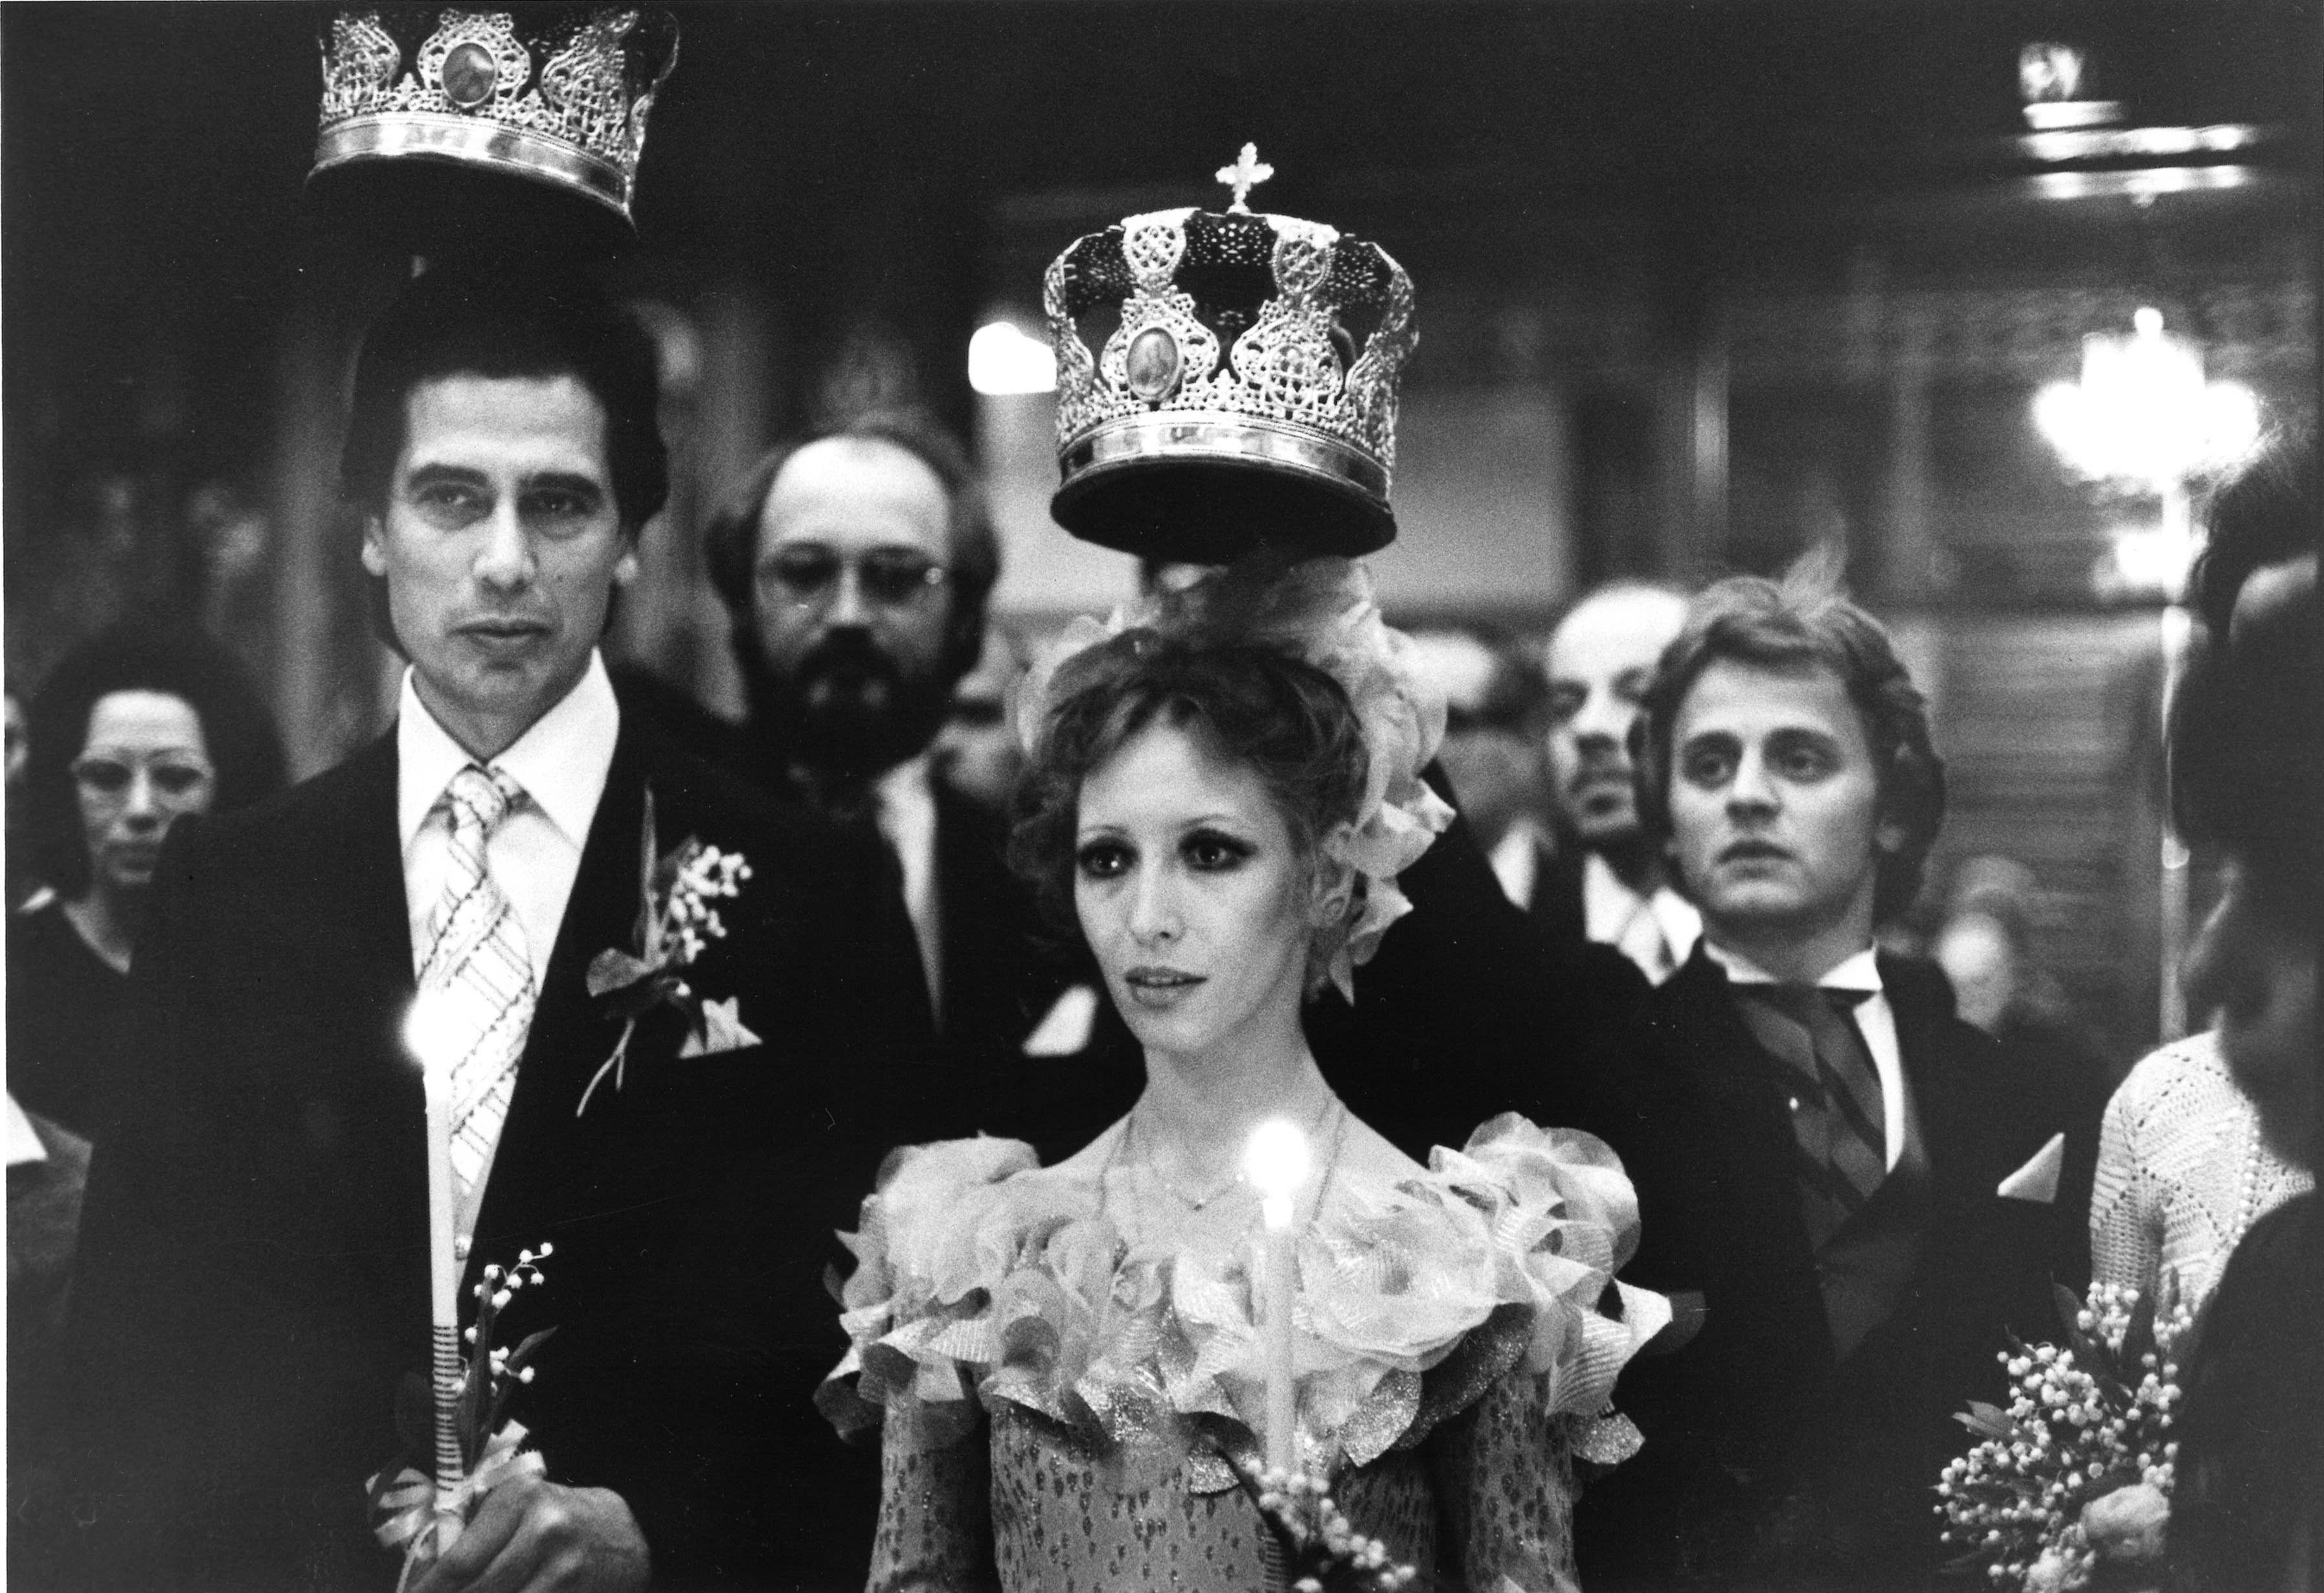 Russian-style crowns are held above Karkar and Makarova's heads, in the latter's case. by Mikhail Baryshnikov. The men wear dark, formal suits, Makarova a dress with a frilled collar.